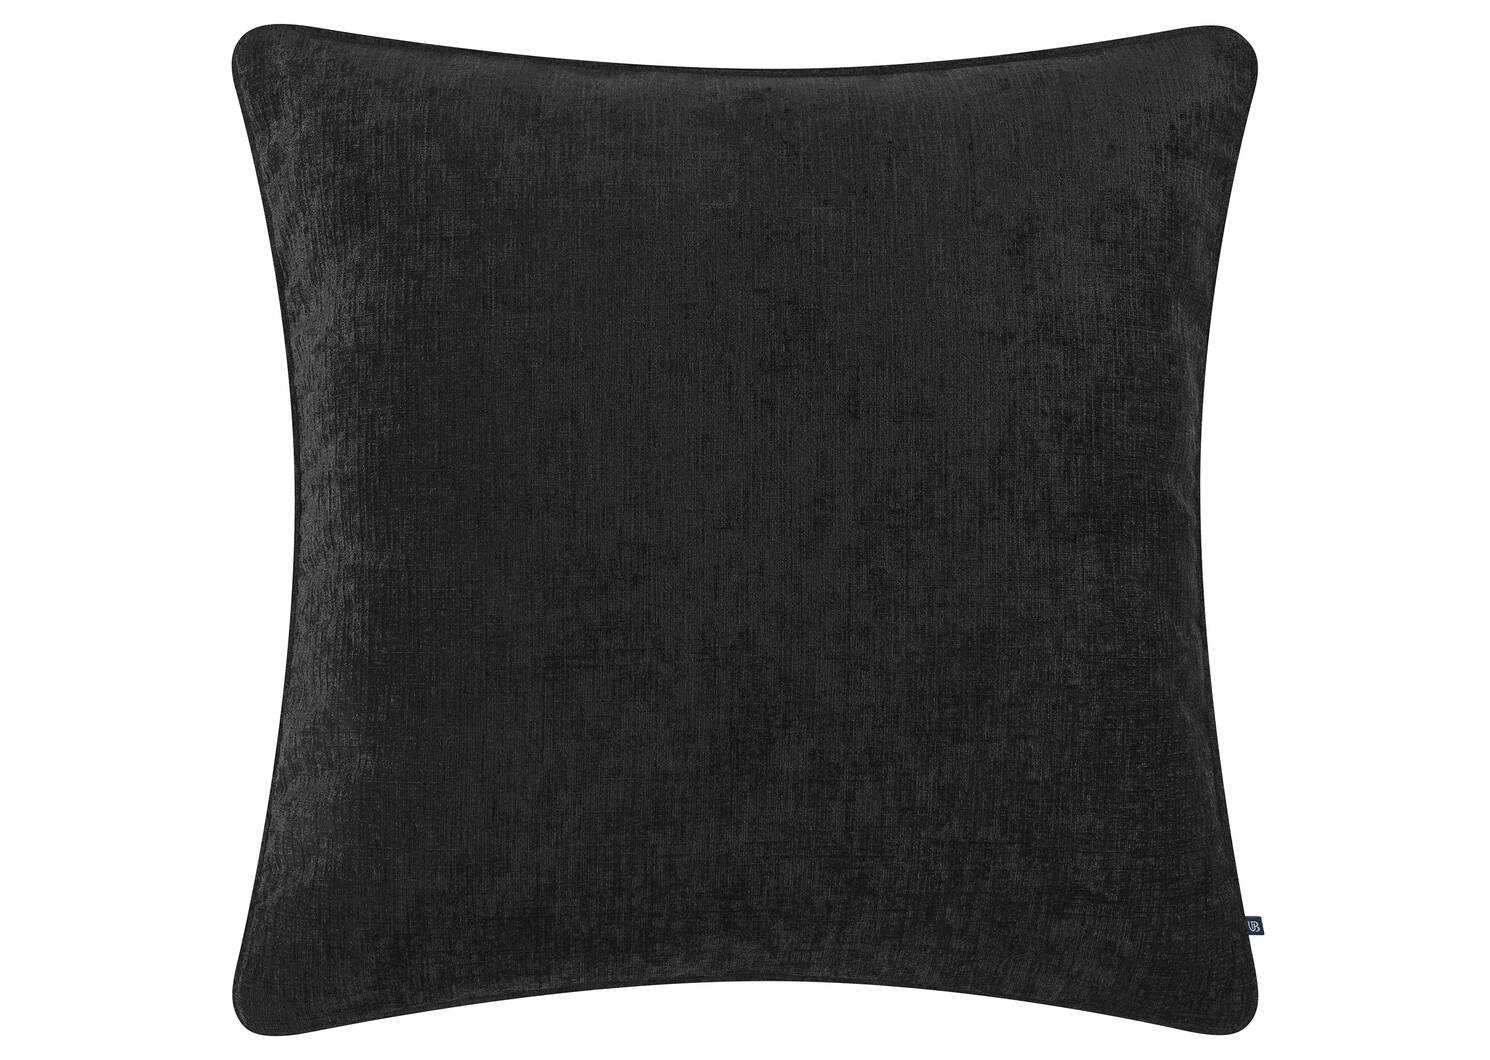 Clooney Pillow 20x20 Charcoal